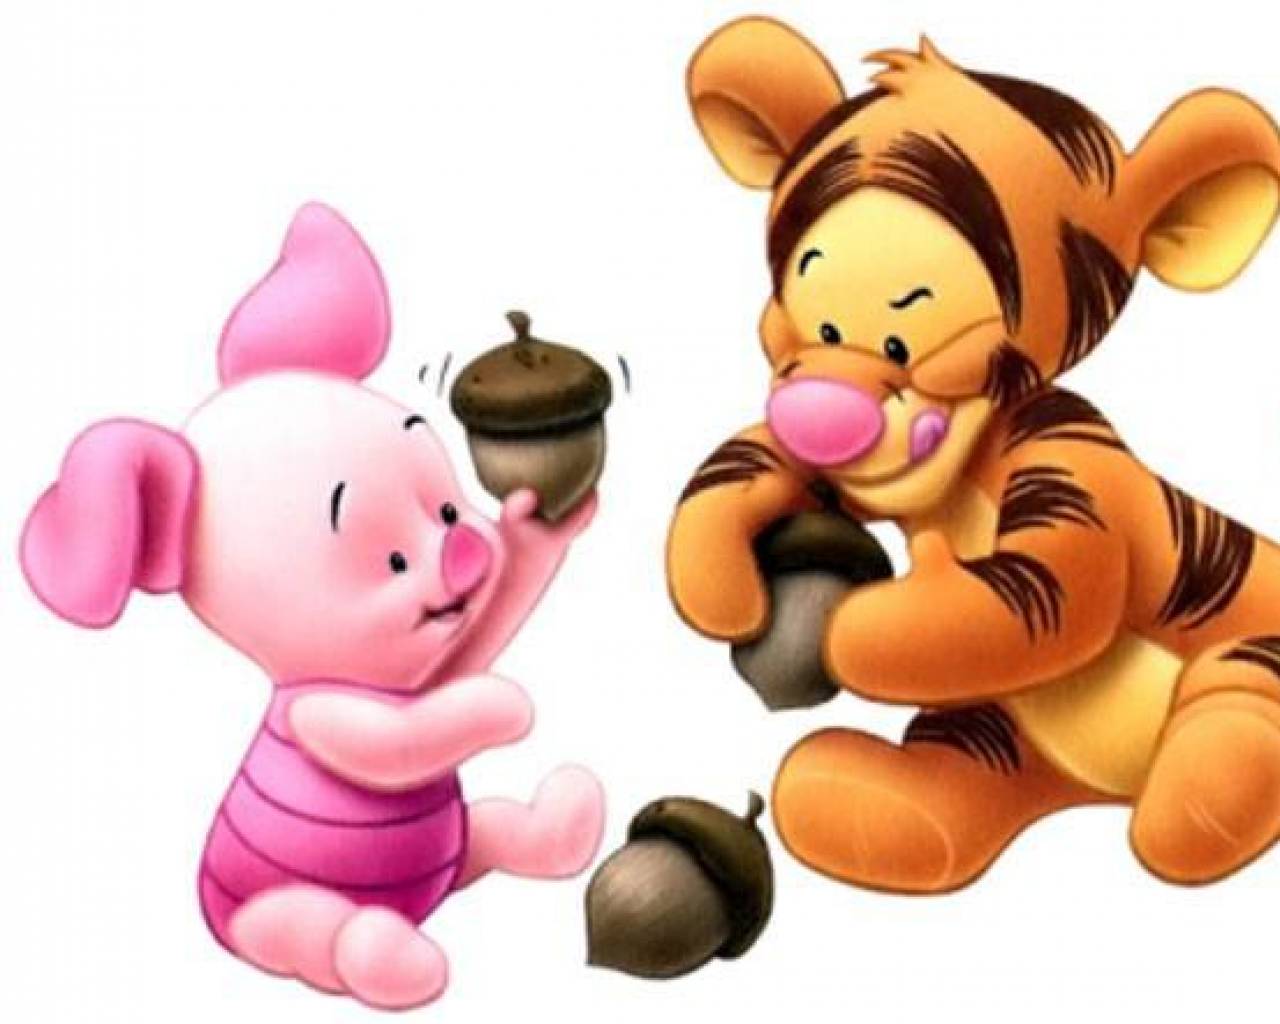 baby Tigger and baby Piglet HD Wallpaper For Desktop background